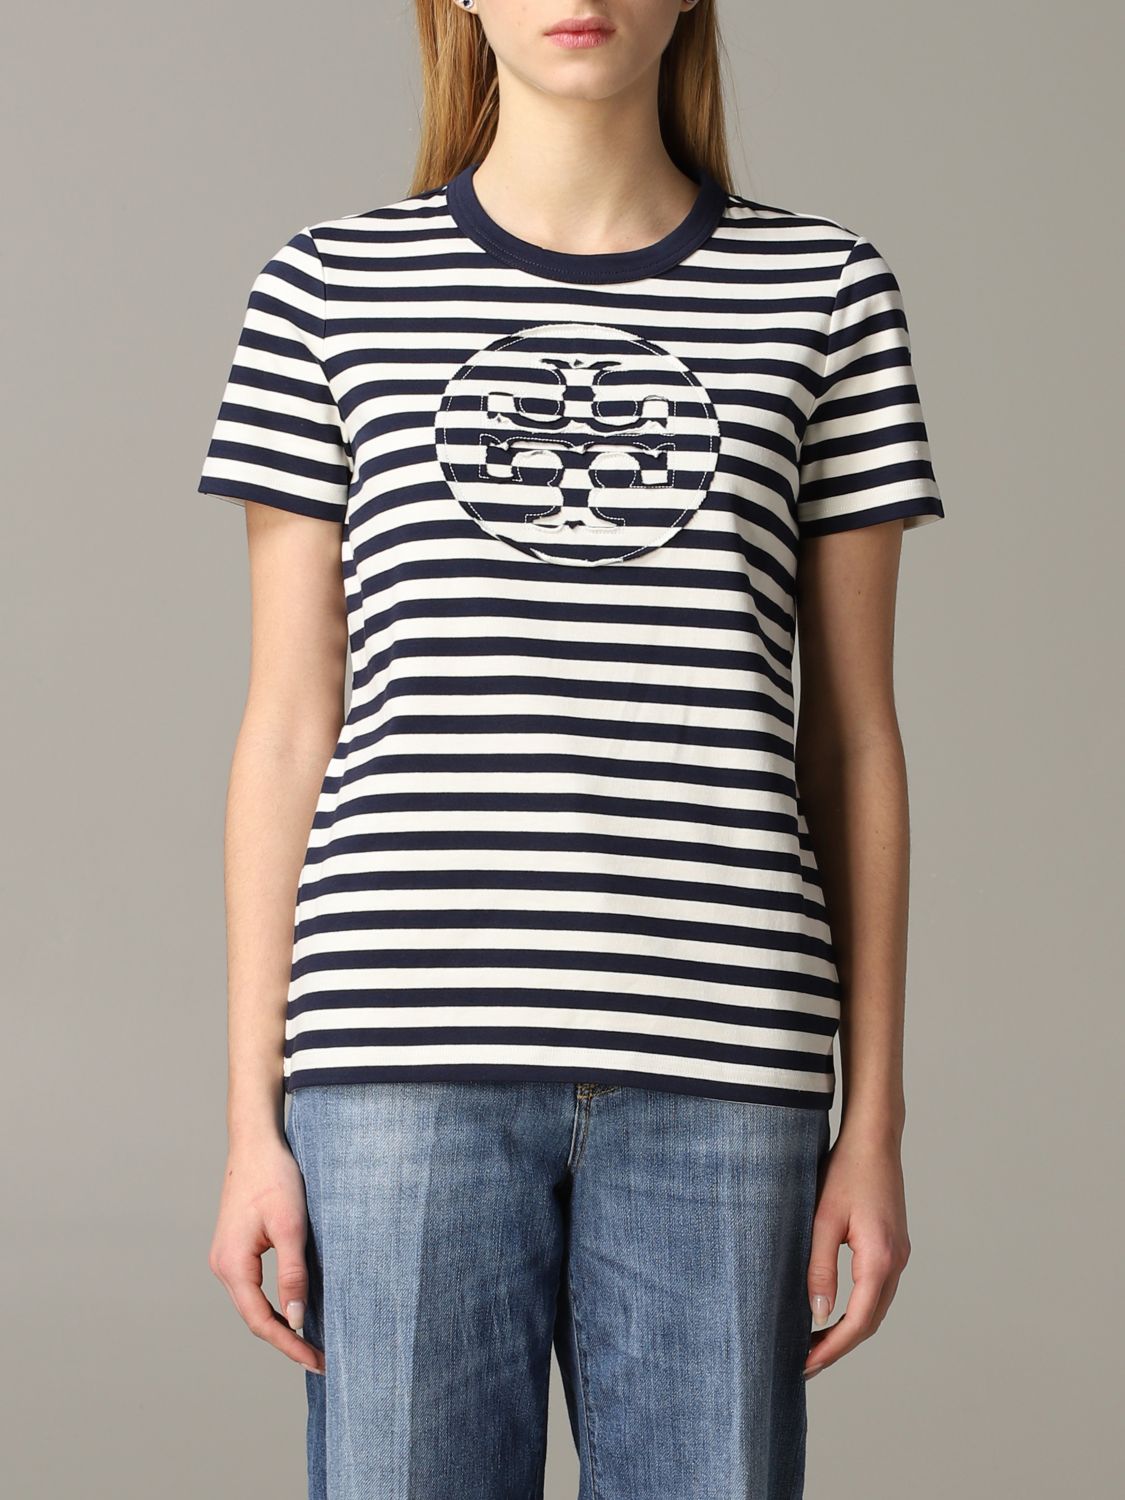 Tory Burch Outlet: striped T-shirt with logo - Black | Tory Burch t ...